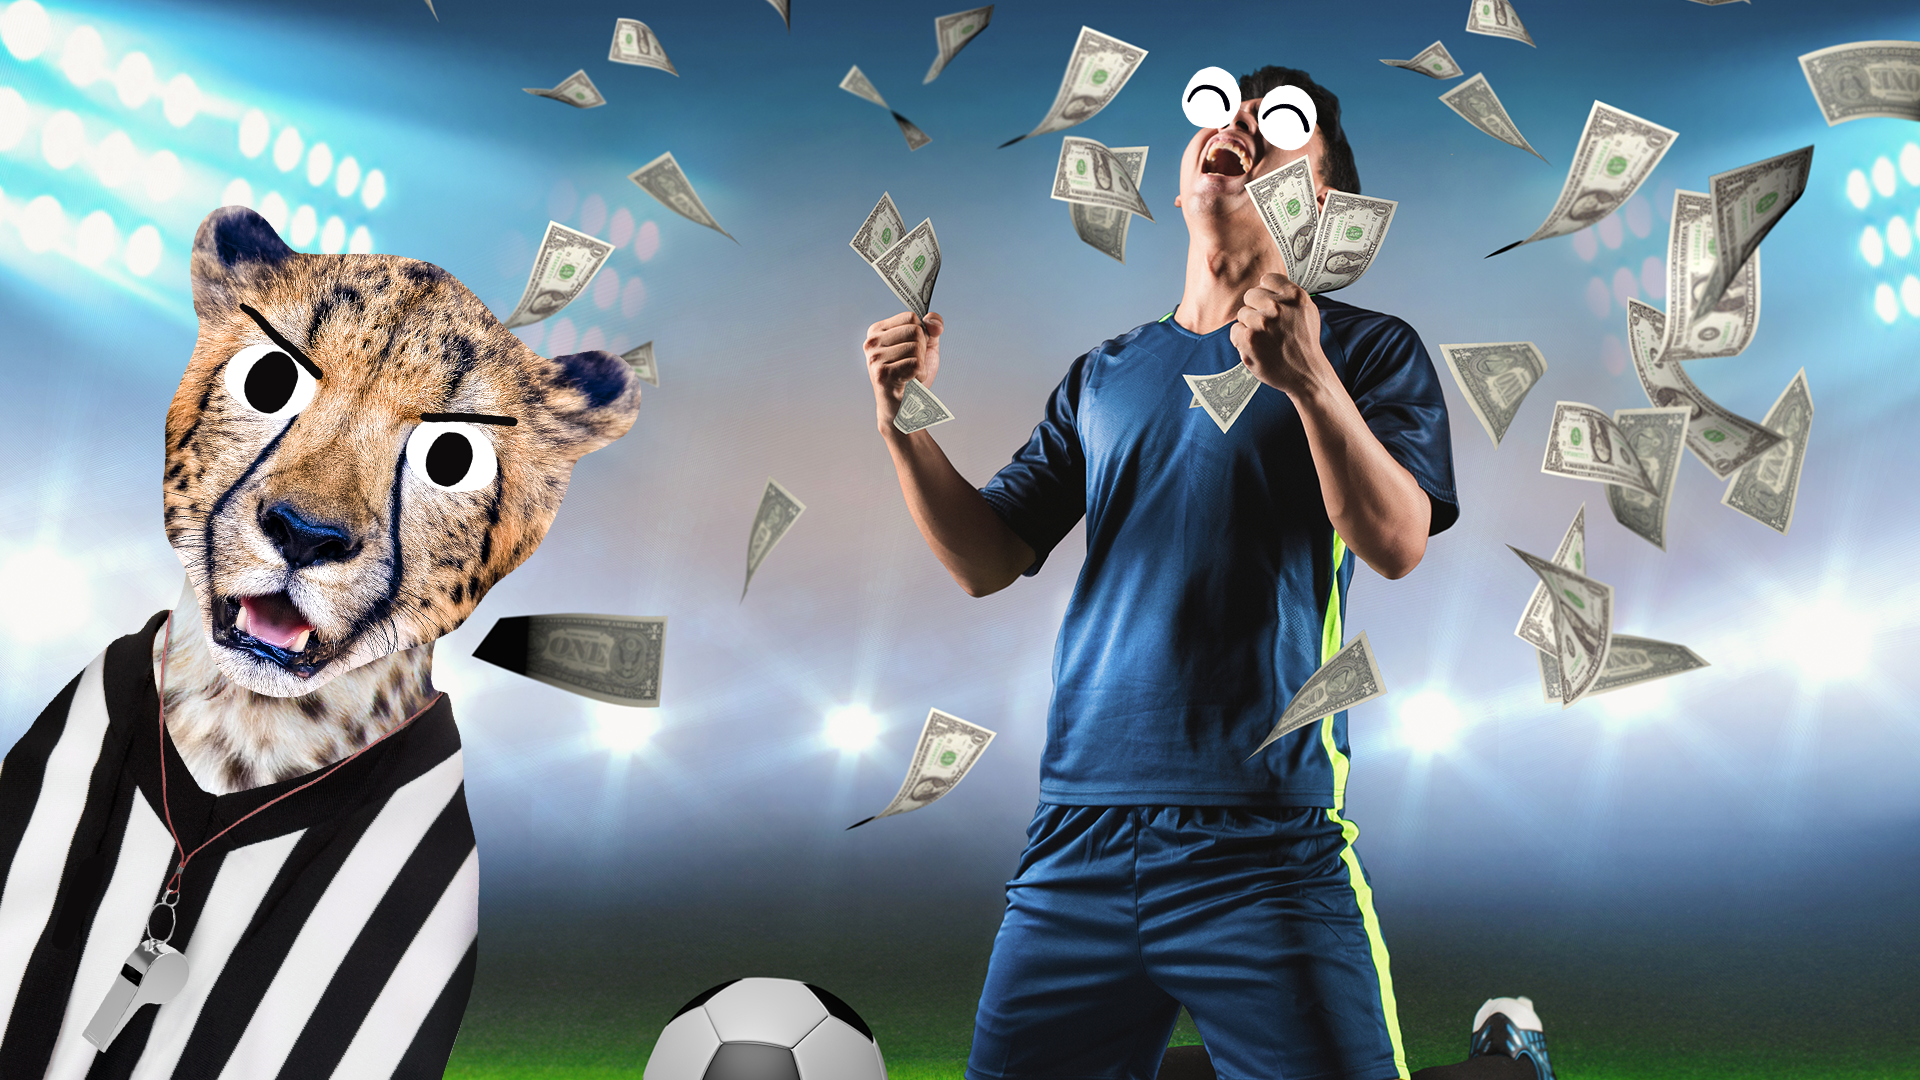 Footballer with lots of money and referee cheetah